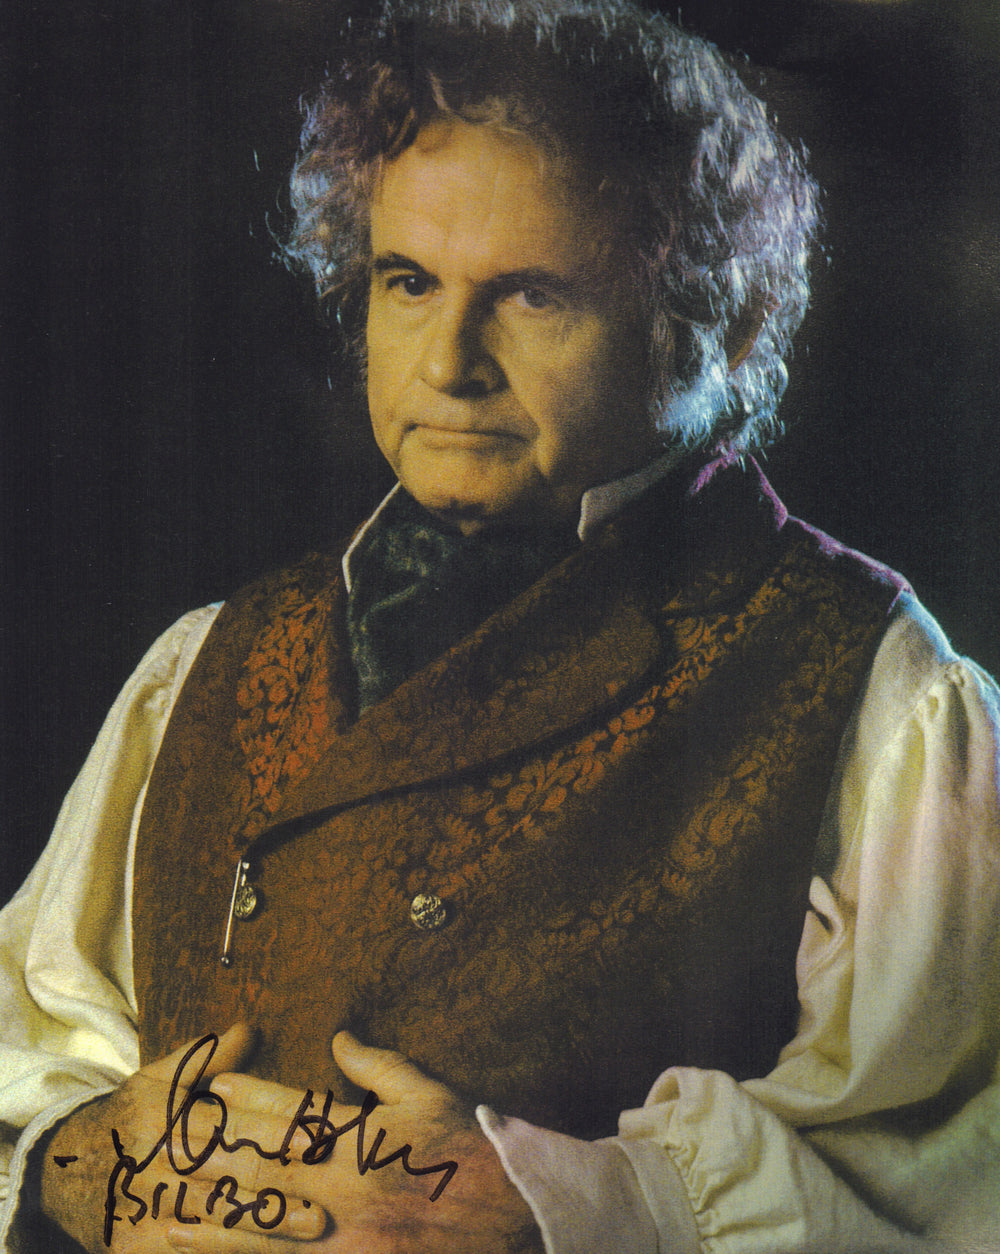 Ian Holm as Bilbo Baggins in The Lord of the Rings: The Fellowship of the Ring Signed 8x10 Photo with Character Name